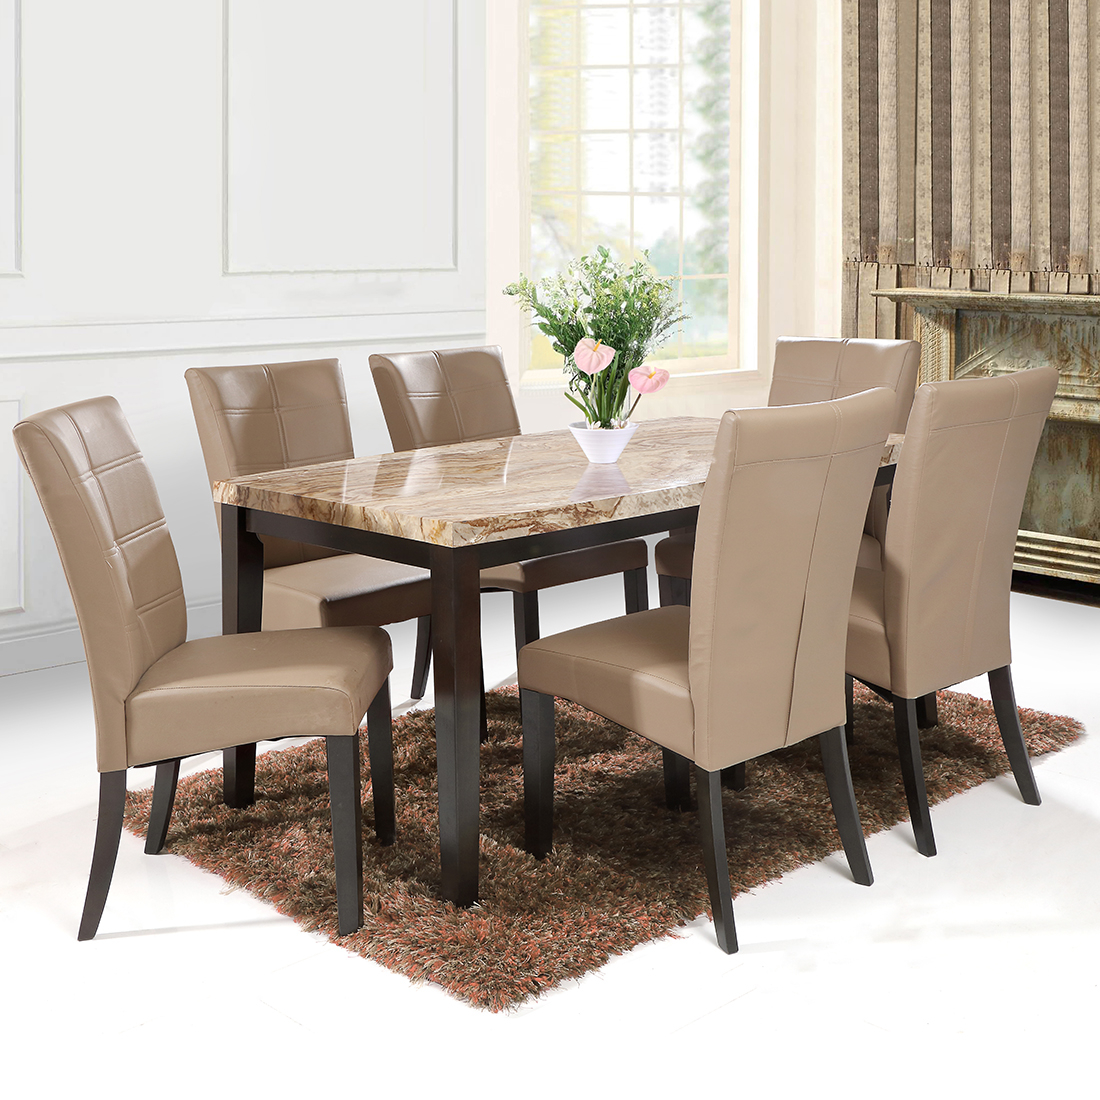 Stella Solid Wood Dining Set 1 Table, Wooden Dining Room Table And 6 Chairs